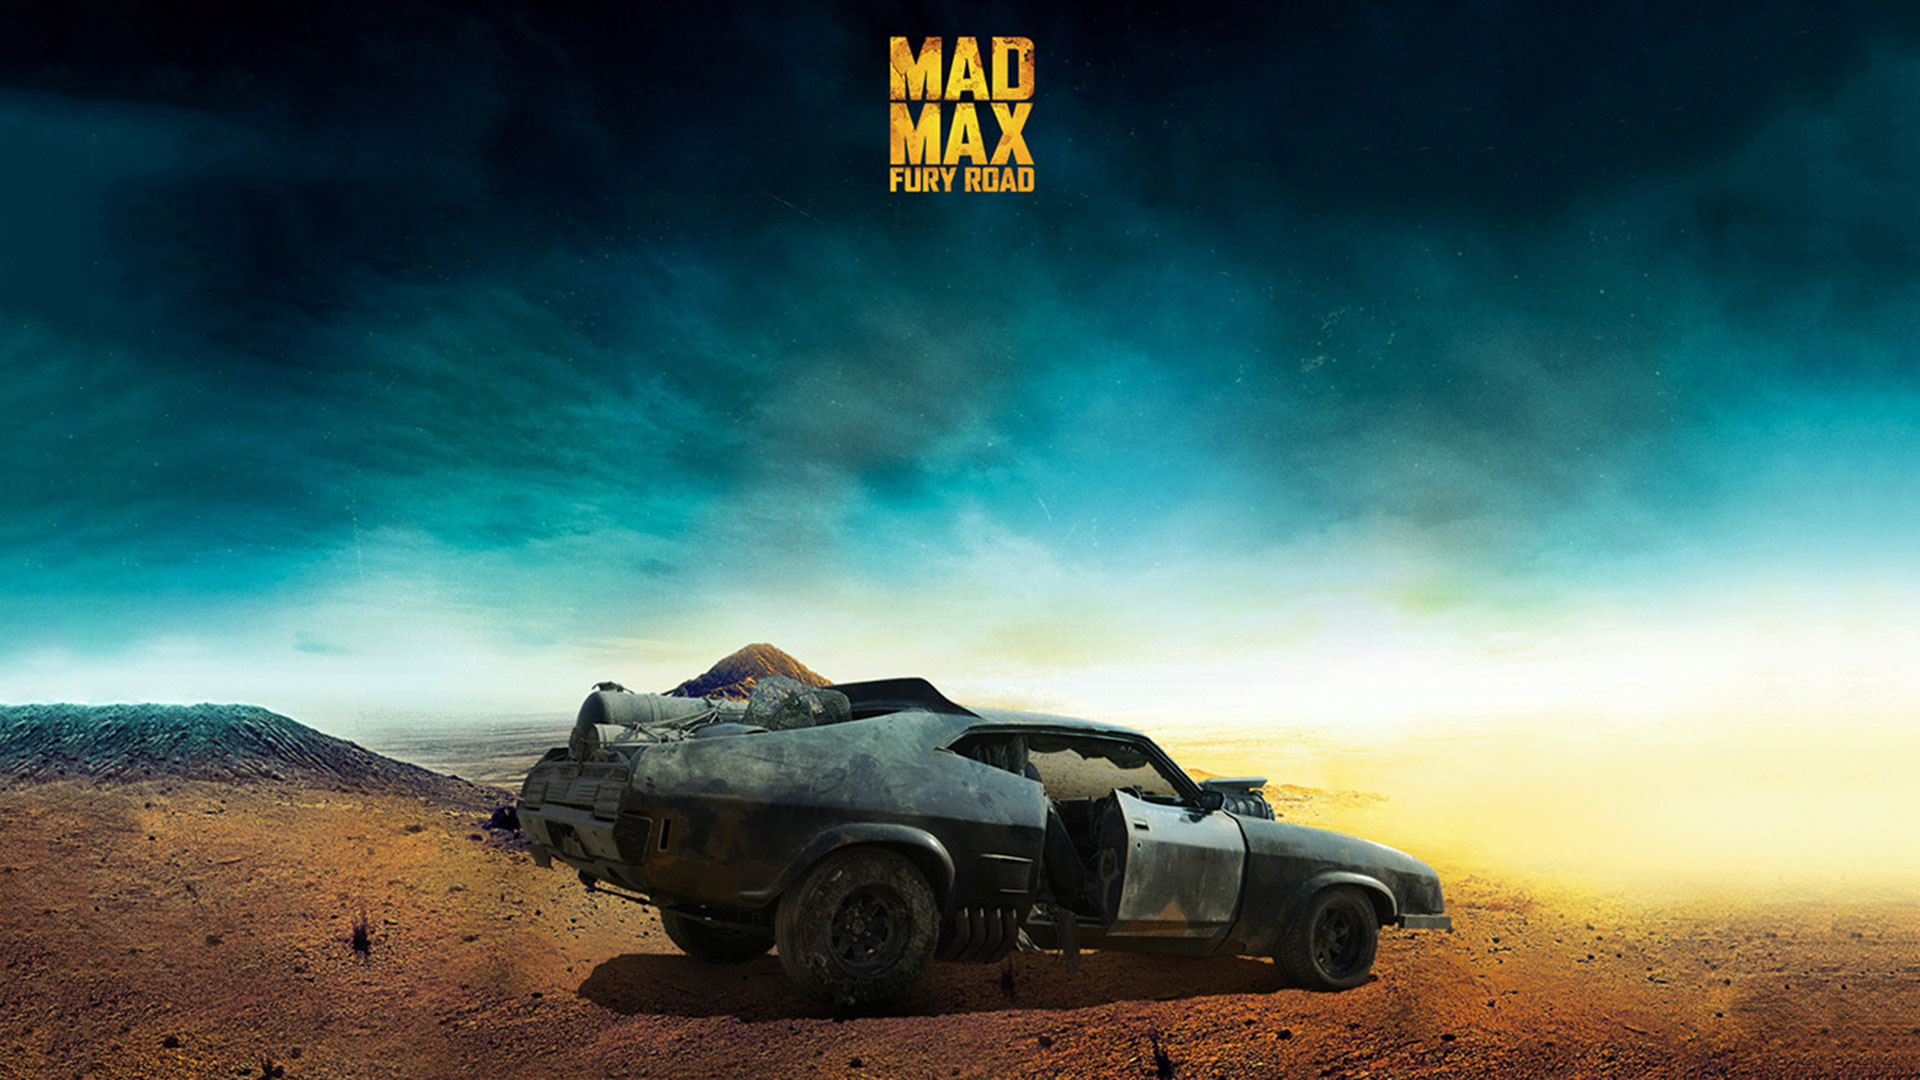 mad-max_-fury-road-wallpapers-29722-8474174